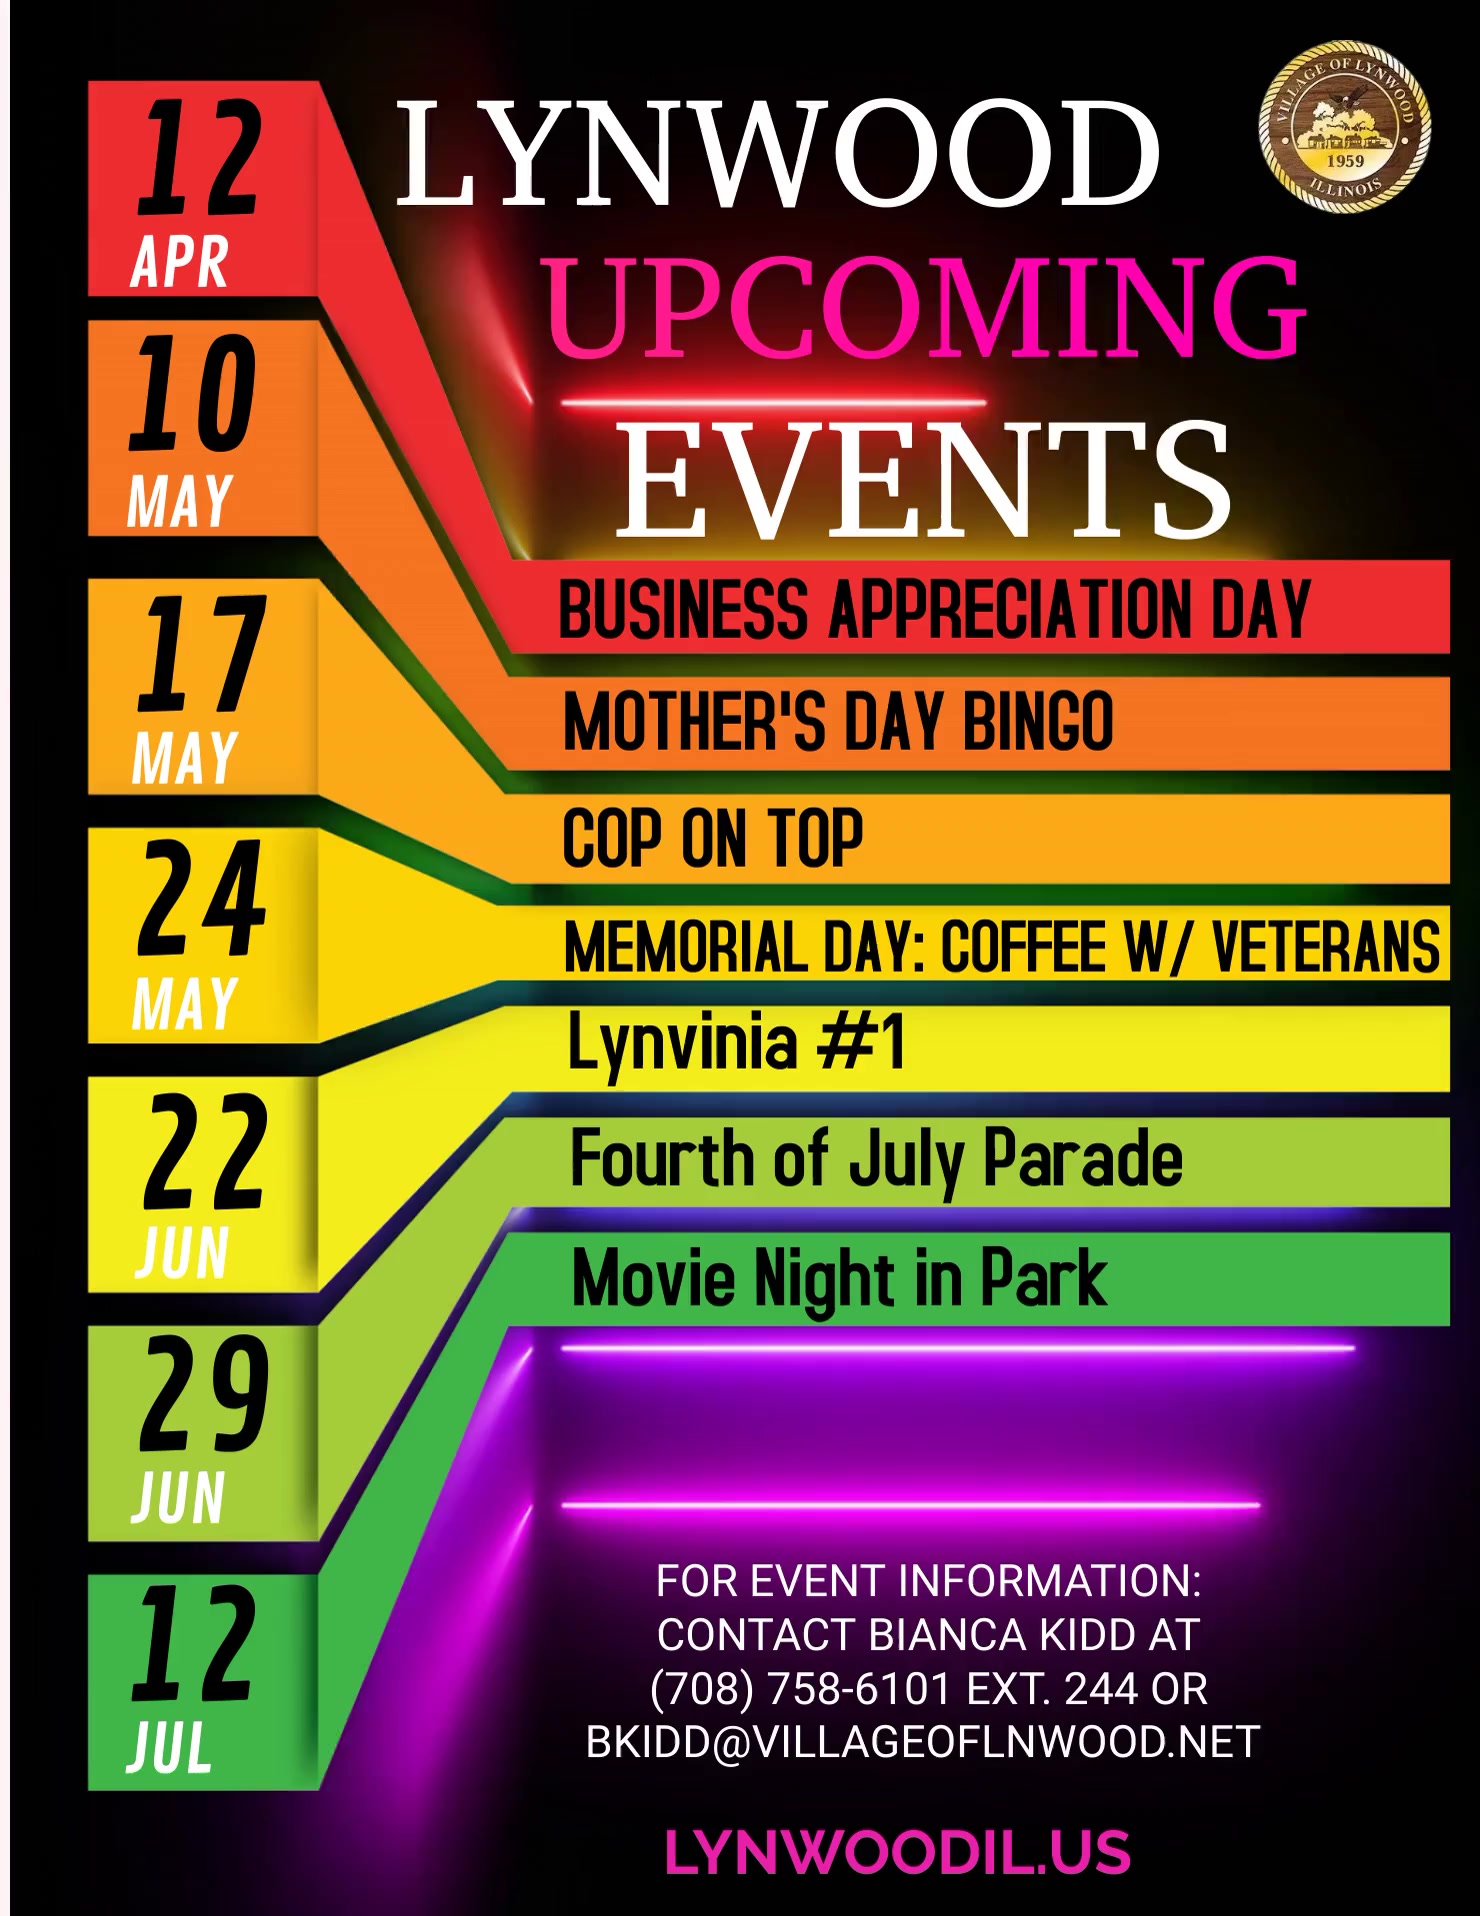 7 DAY EVENTS FLIER